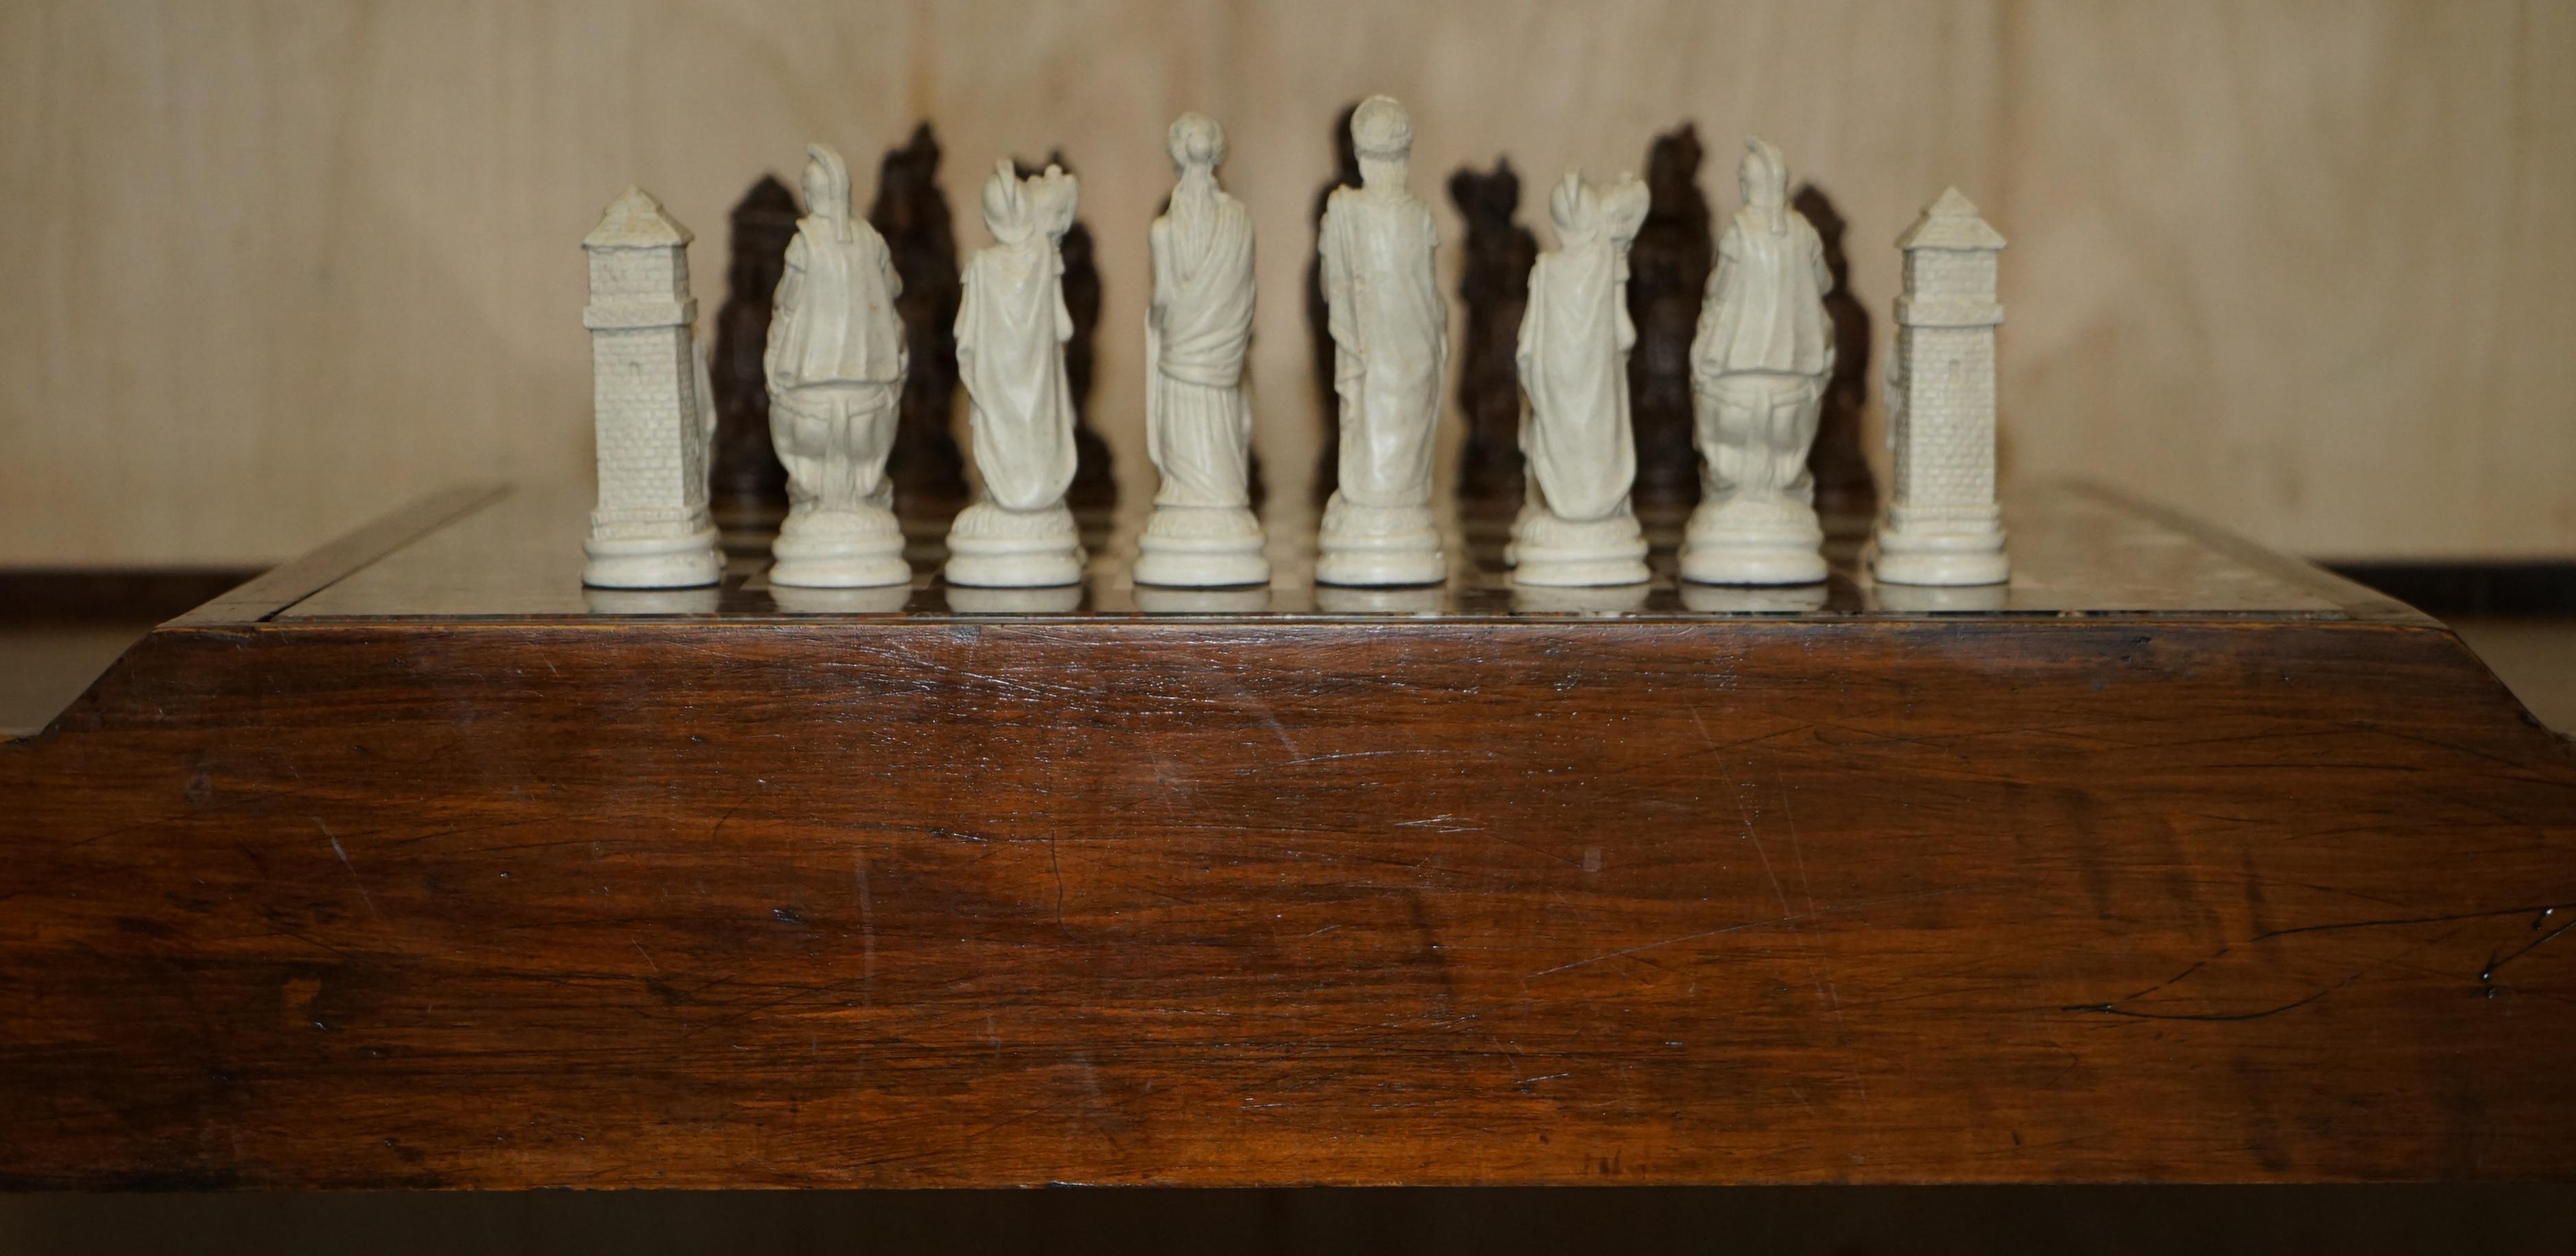 20th Century Vintage Chessboard Coffee Table with Marble Board and ebonized Chess Set Pieces